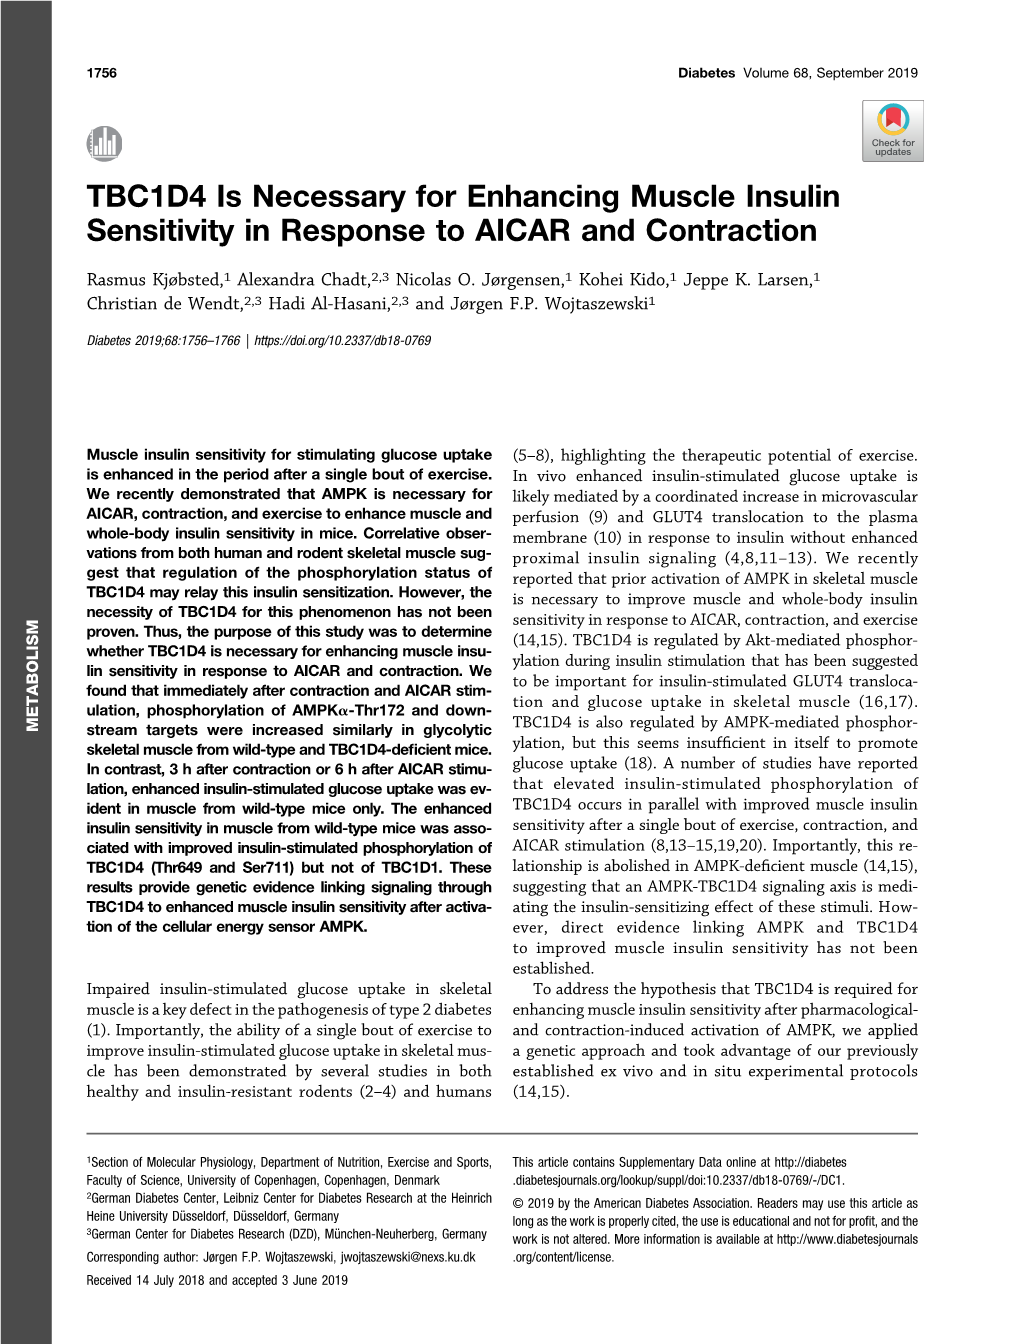 TBC1D4 Is Necessary for Enhancing Muscle Insulin Sensitivity in Response to AICAR and Contraction